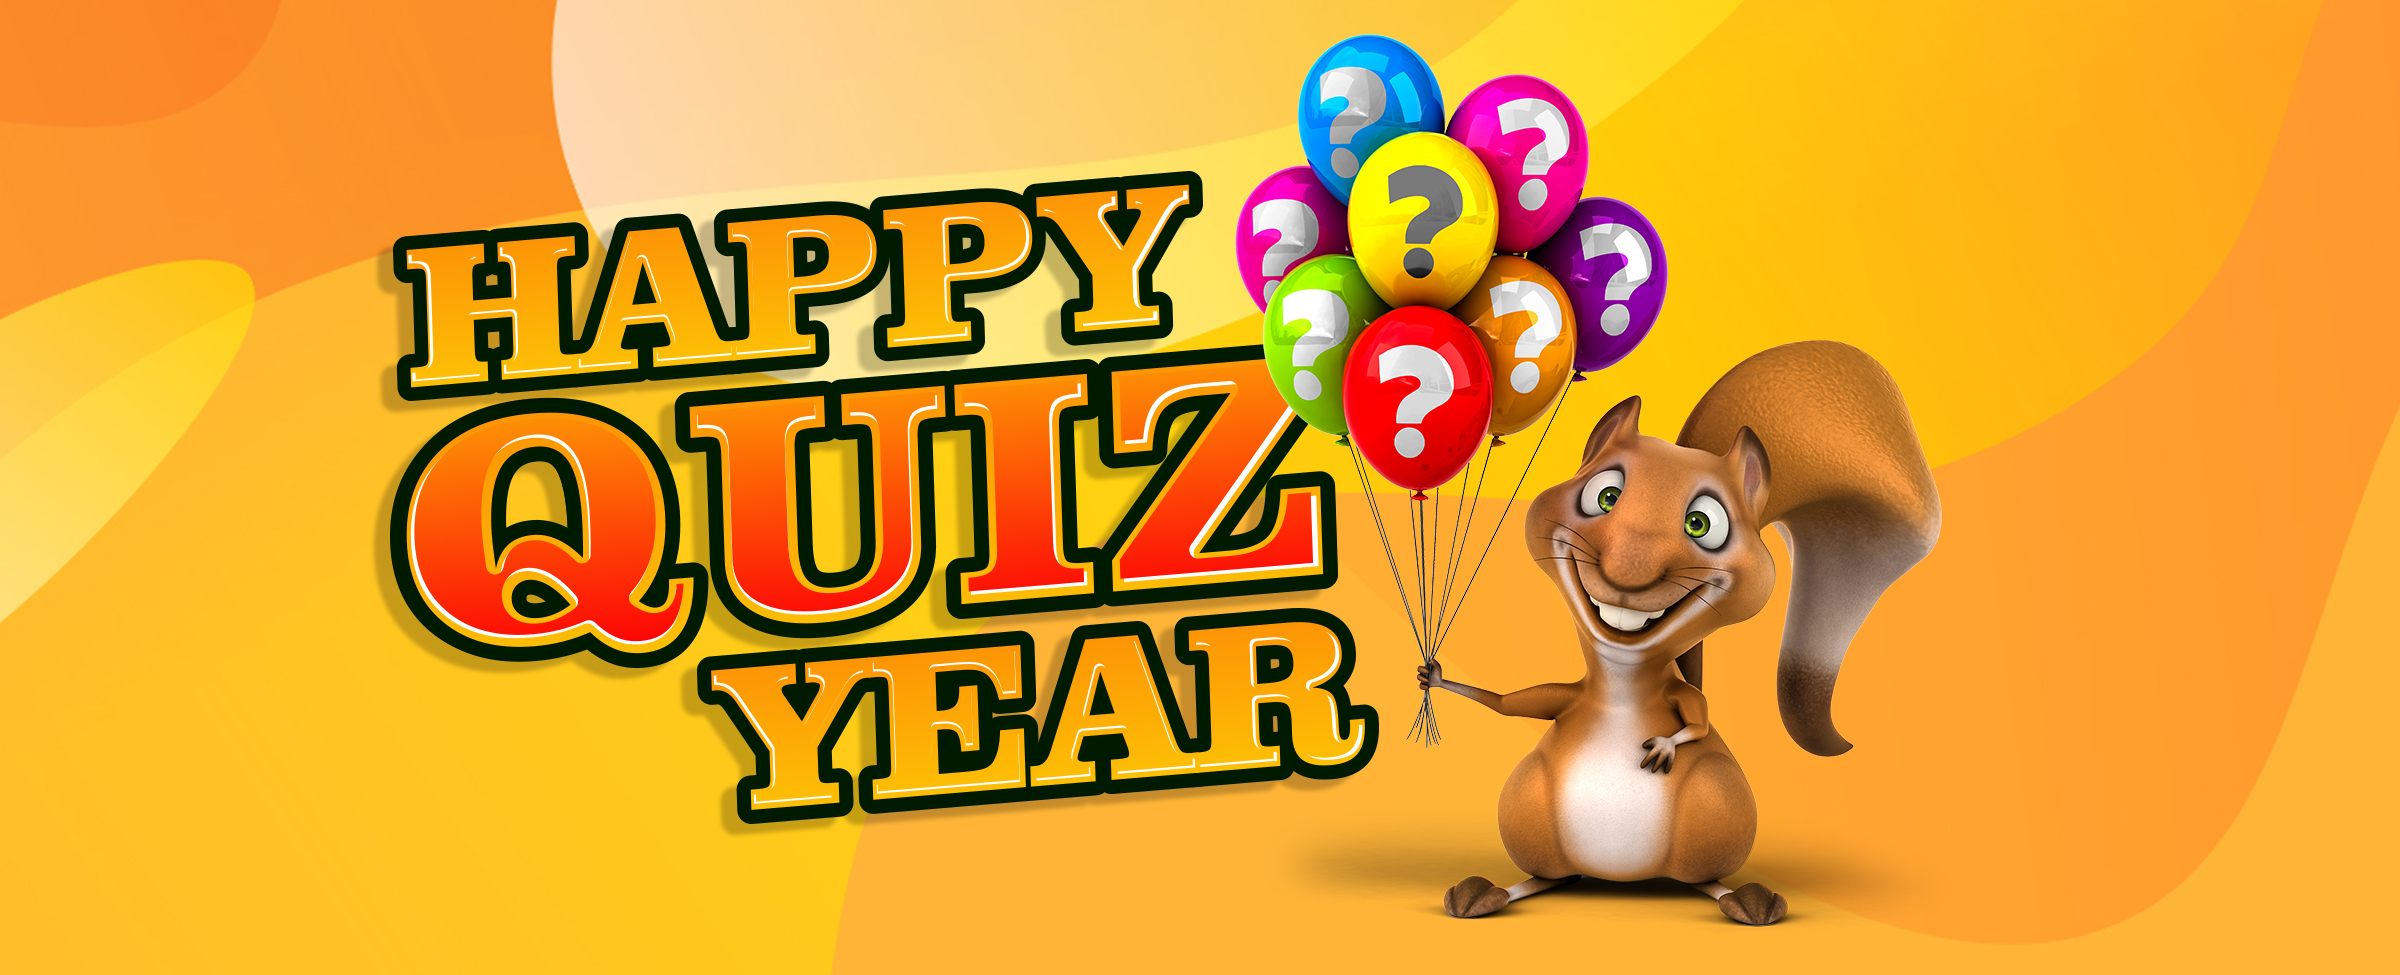 An animated squirrel holds up a bunch of different-colored balloons, each bearing a question mark, next to the words “Happy quiz year”, against an abstract orange background.